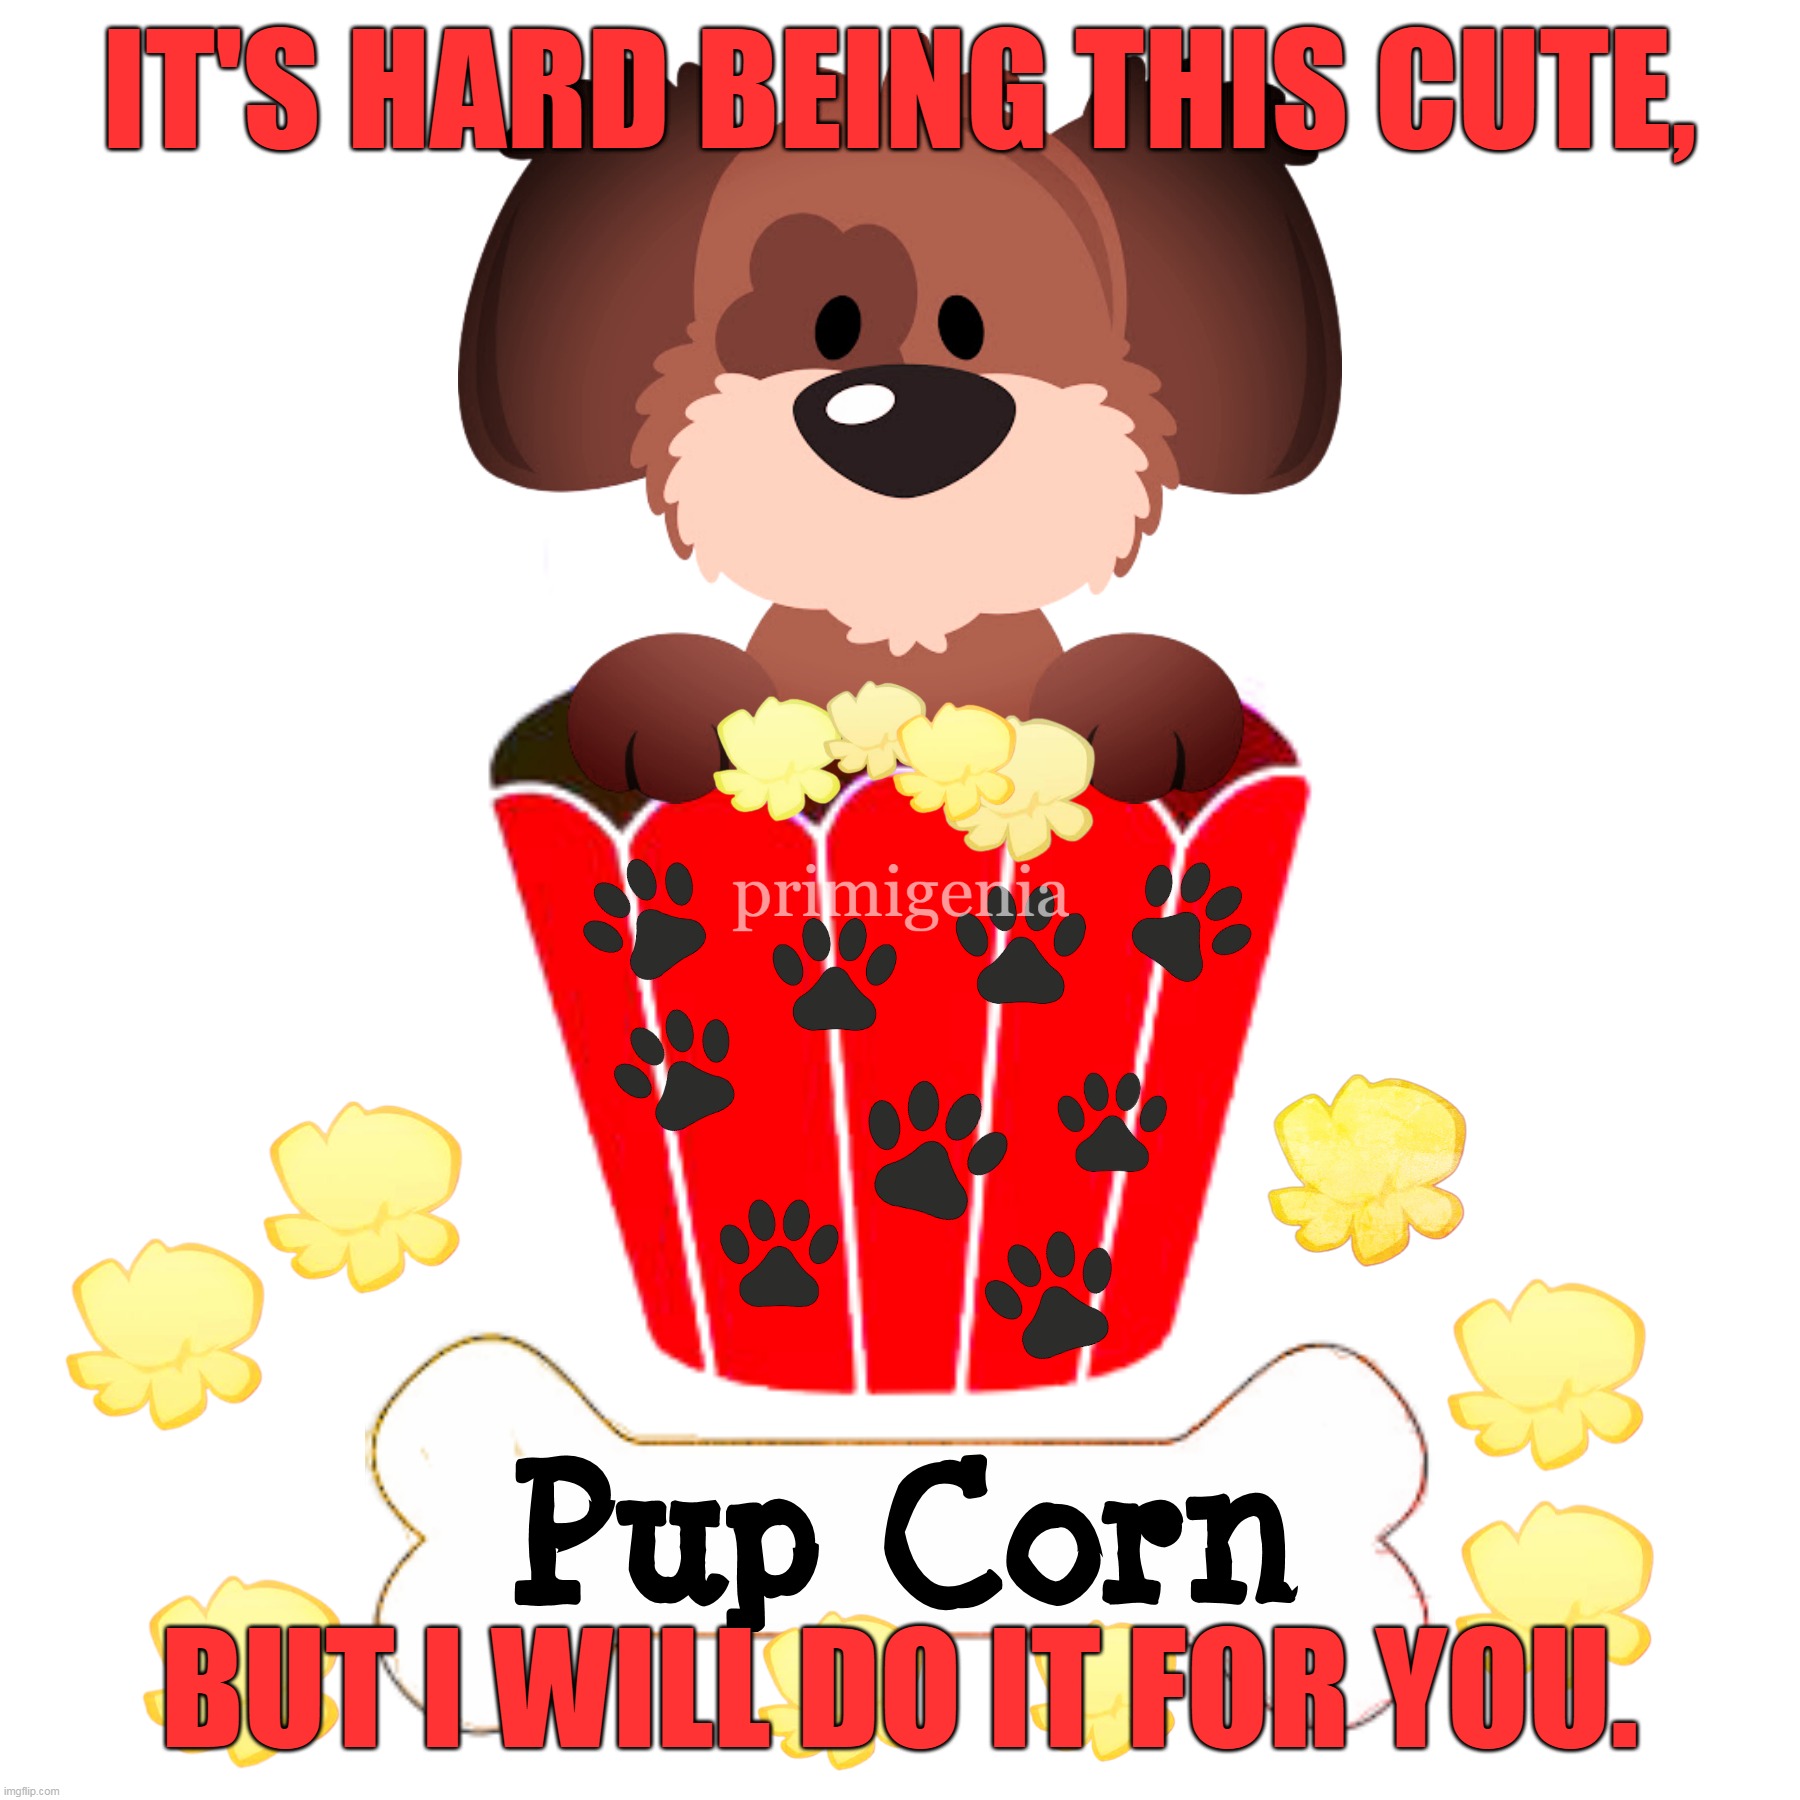 pupcorn | IT'S HARD BEING THIS CUTE, BUT I WILL DO IT FOR YOU. | image tagged in pup,corn,pupcorn | made w/ Imgflip meme maker